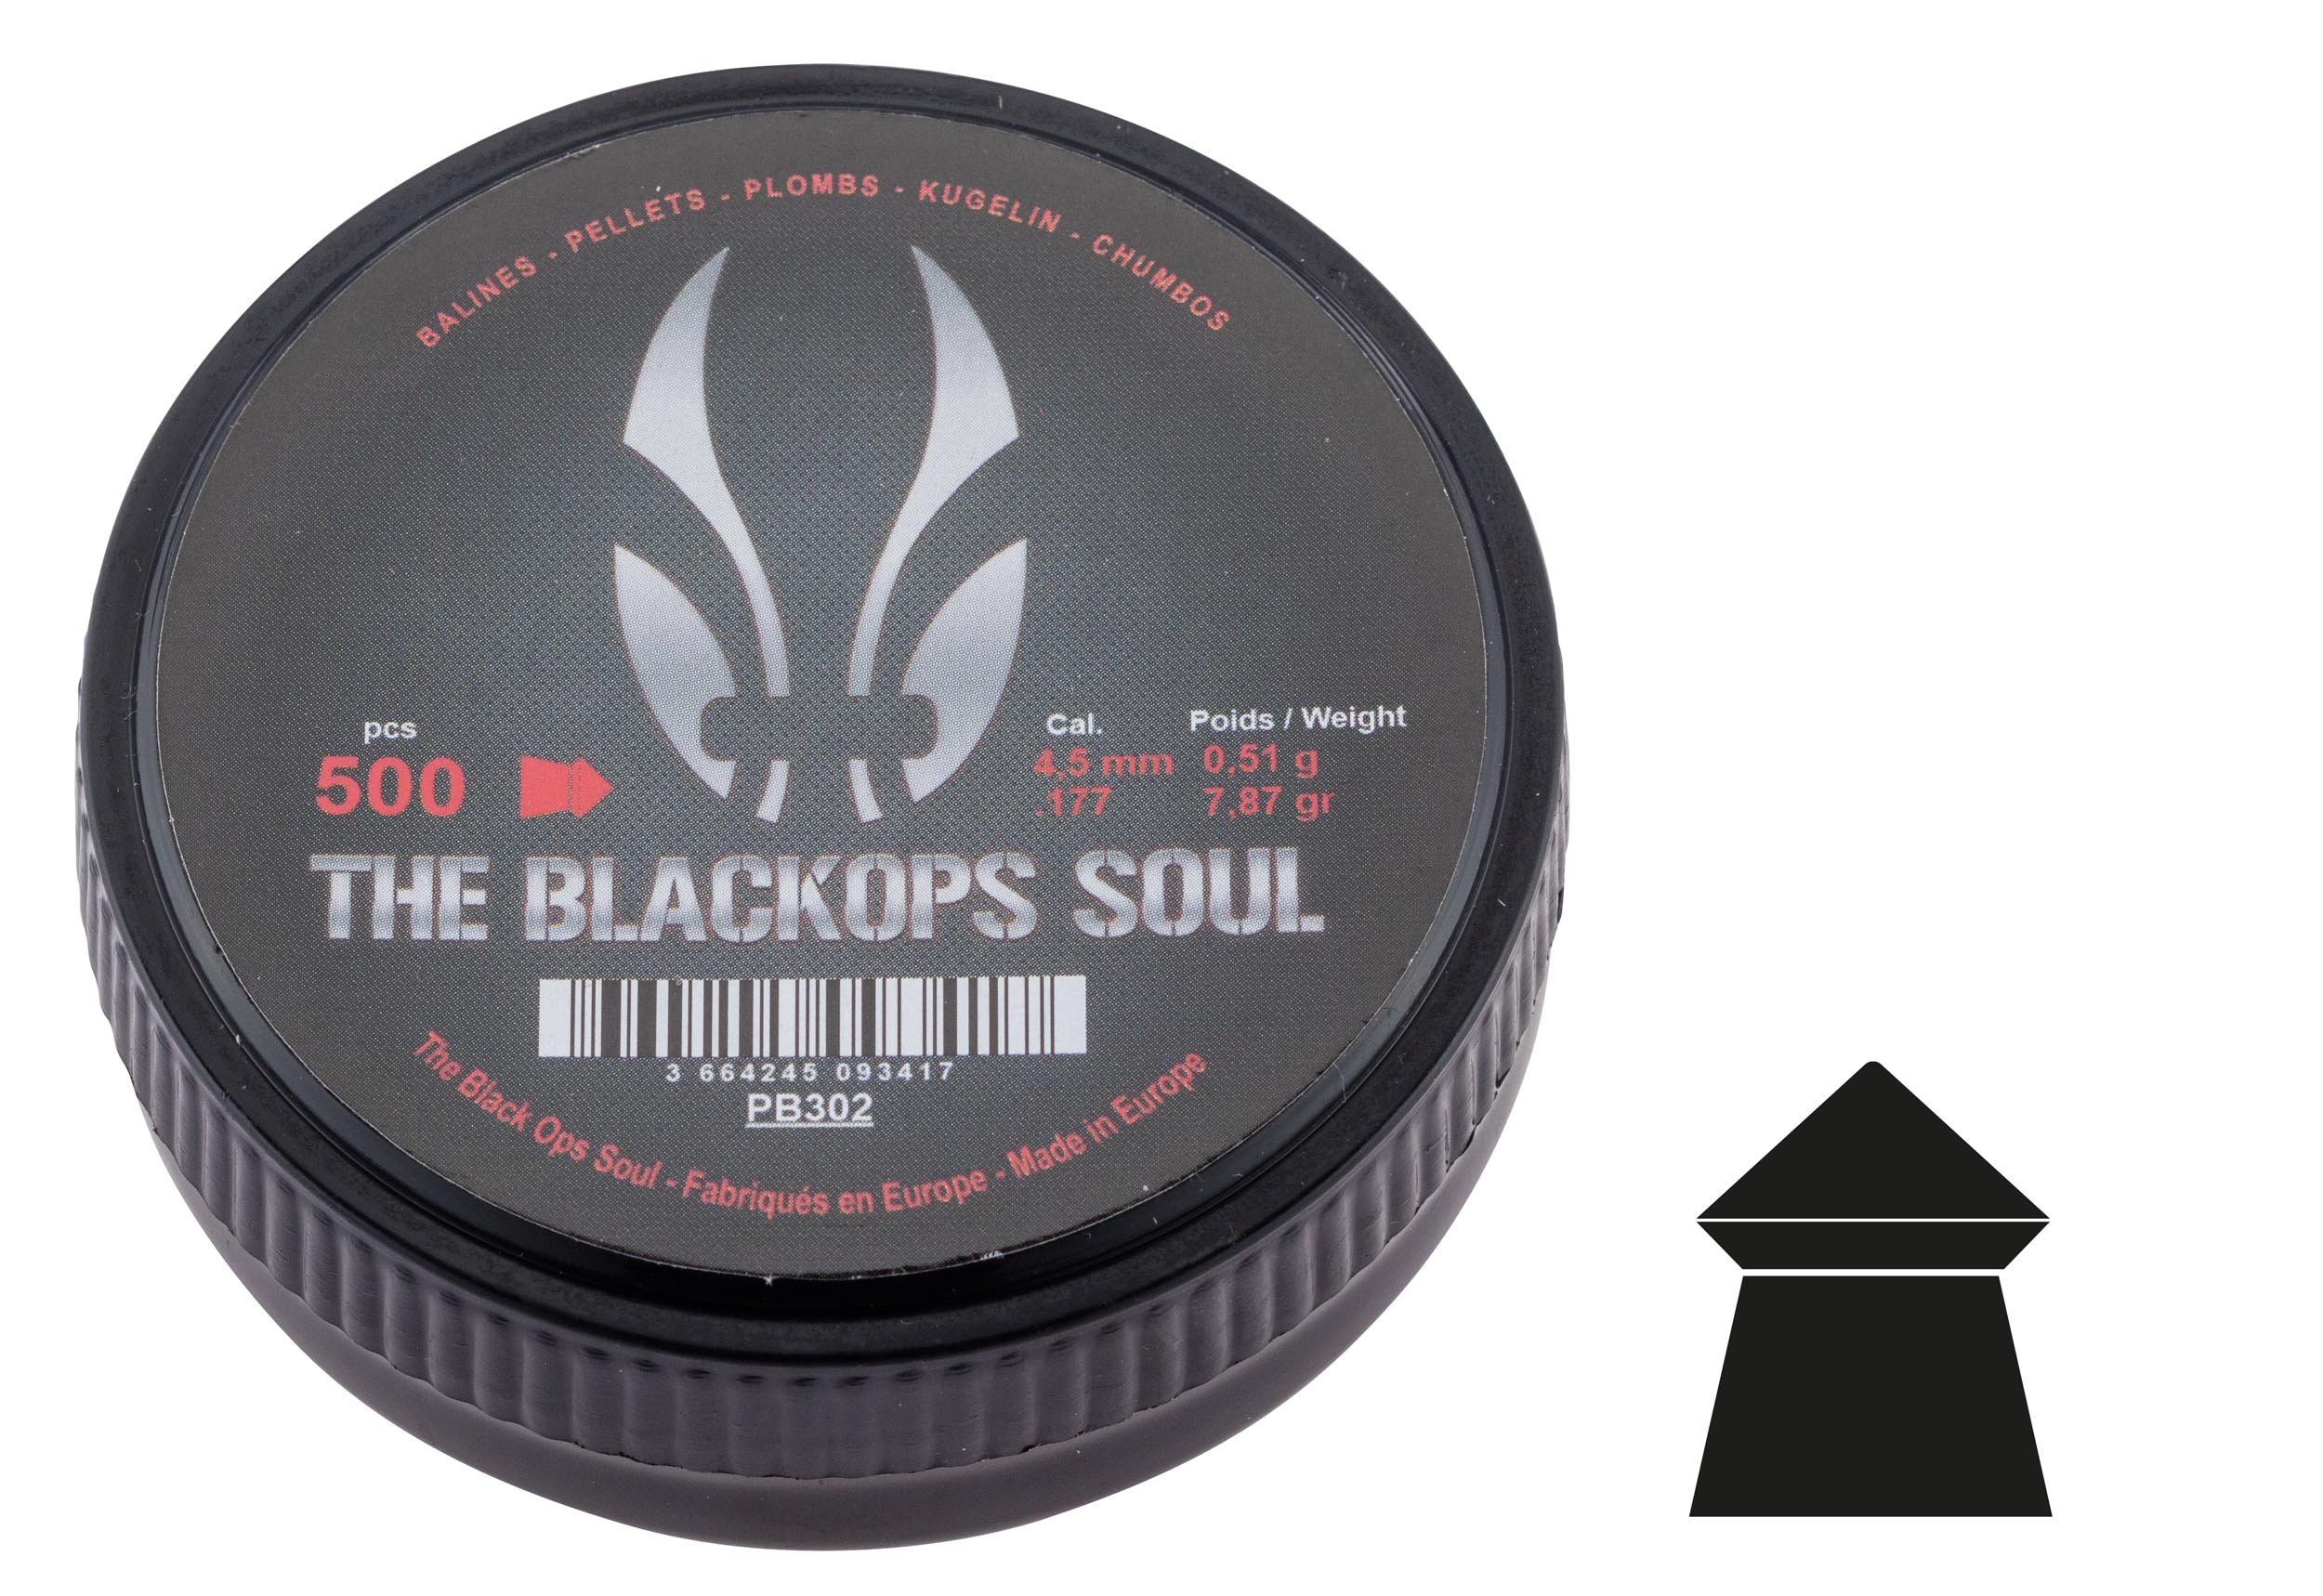 PB302-12 Leads The Black Ops Soul with pointed head cal. 4.5 mm - PB302